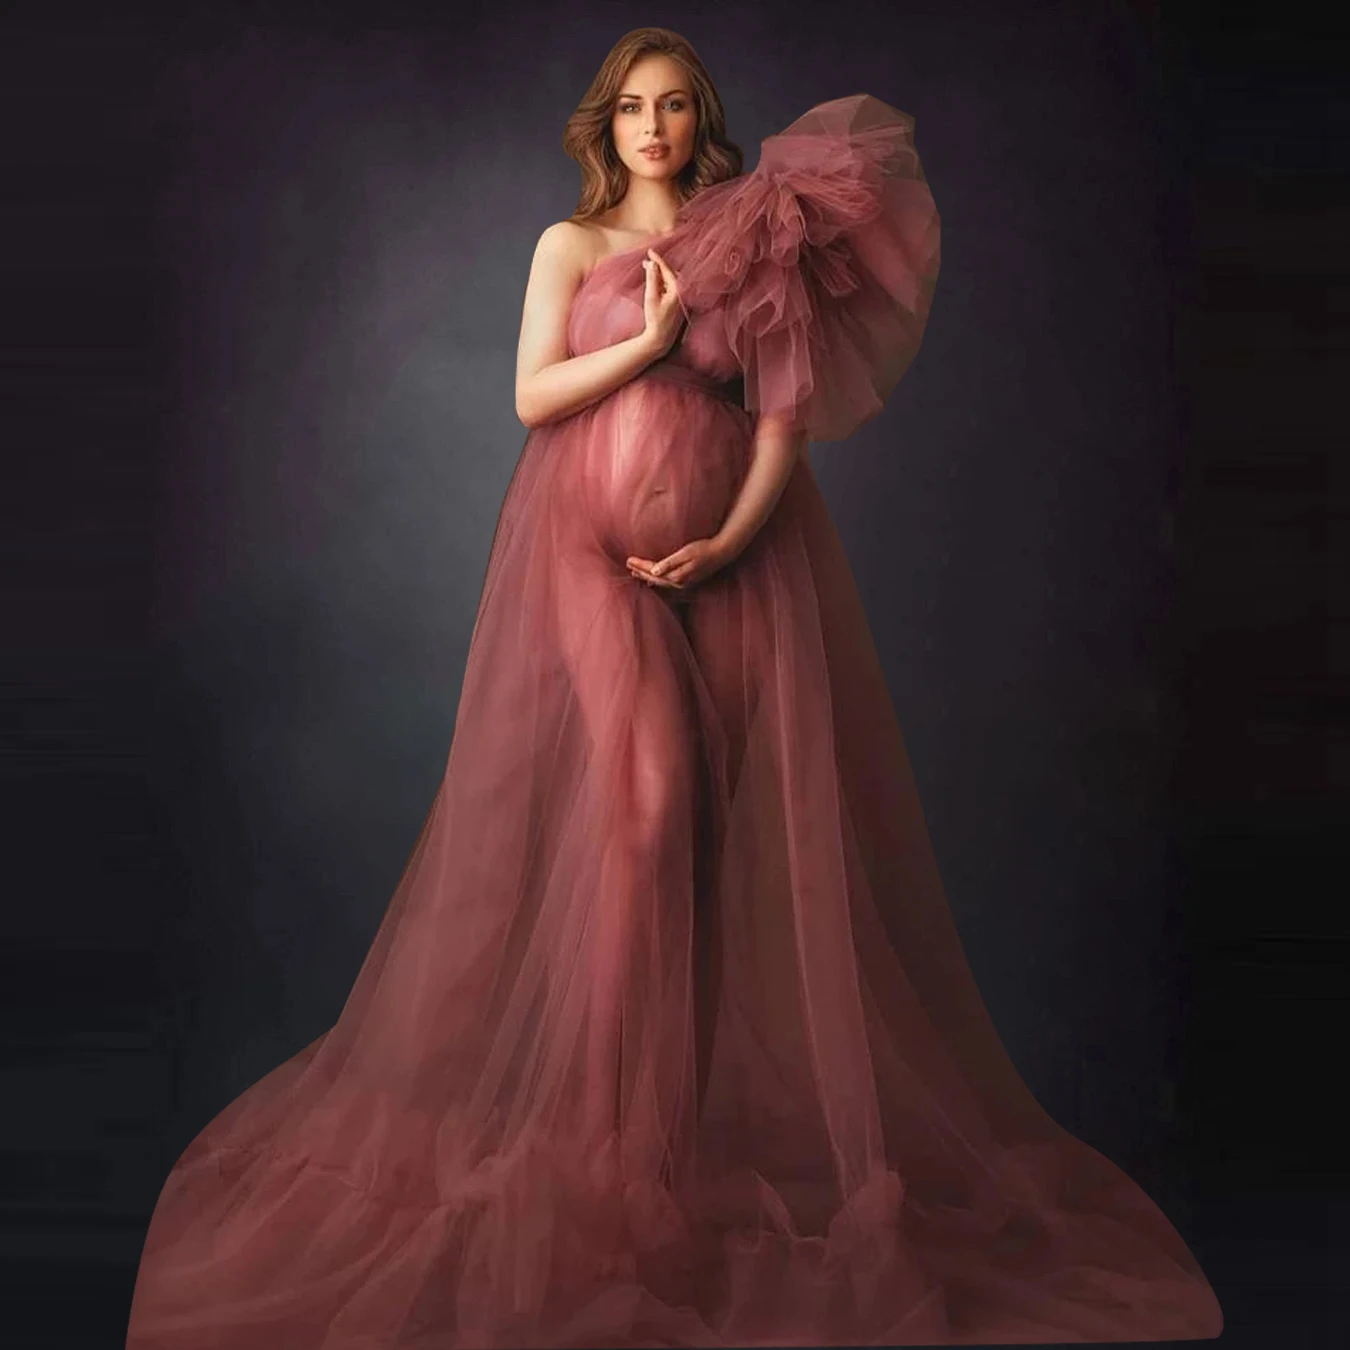 Elegant One Shoulder Tulle Maternity Dresses See Through Sexy Women Tulle Maternity Dressing Gowns For Photography